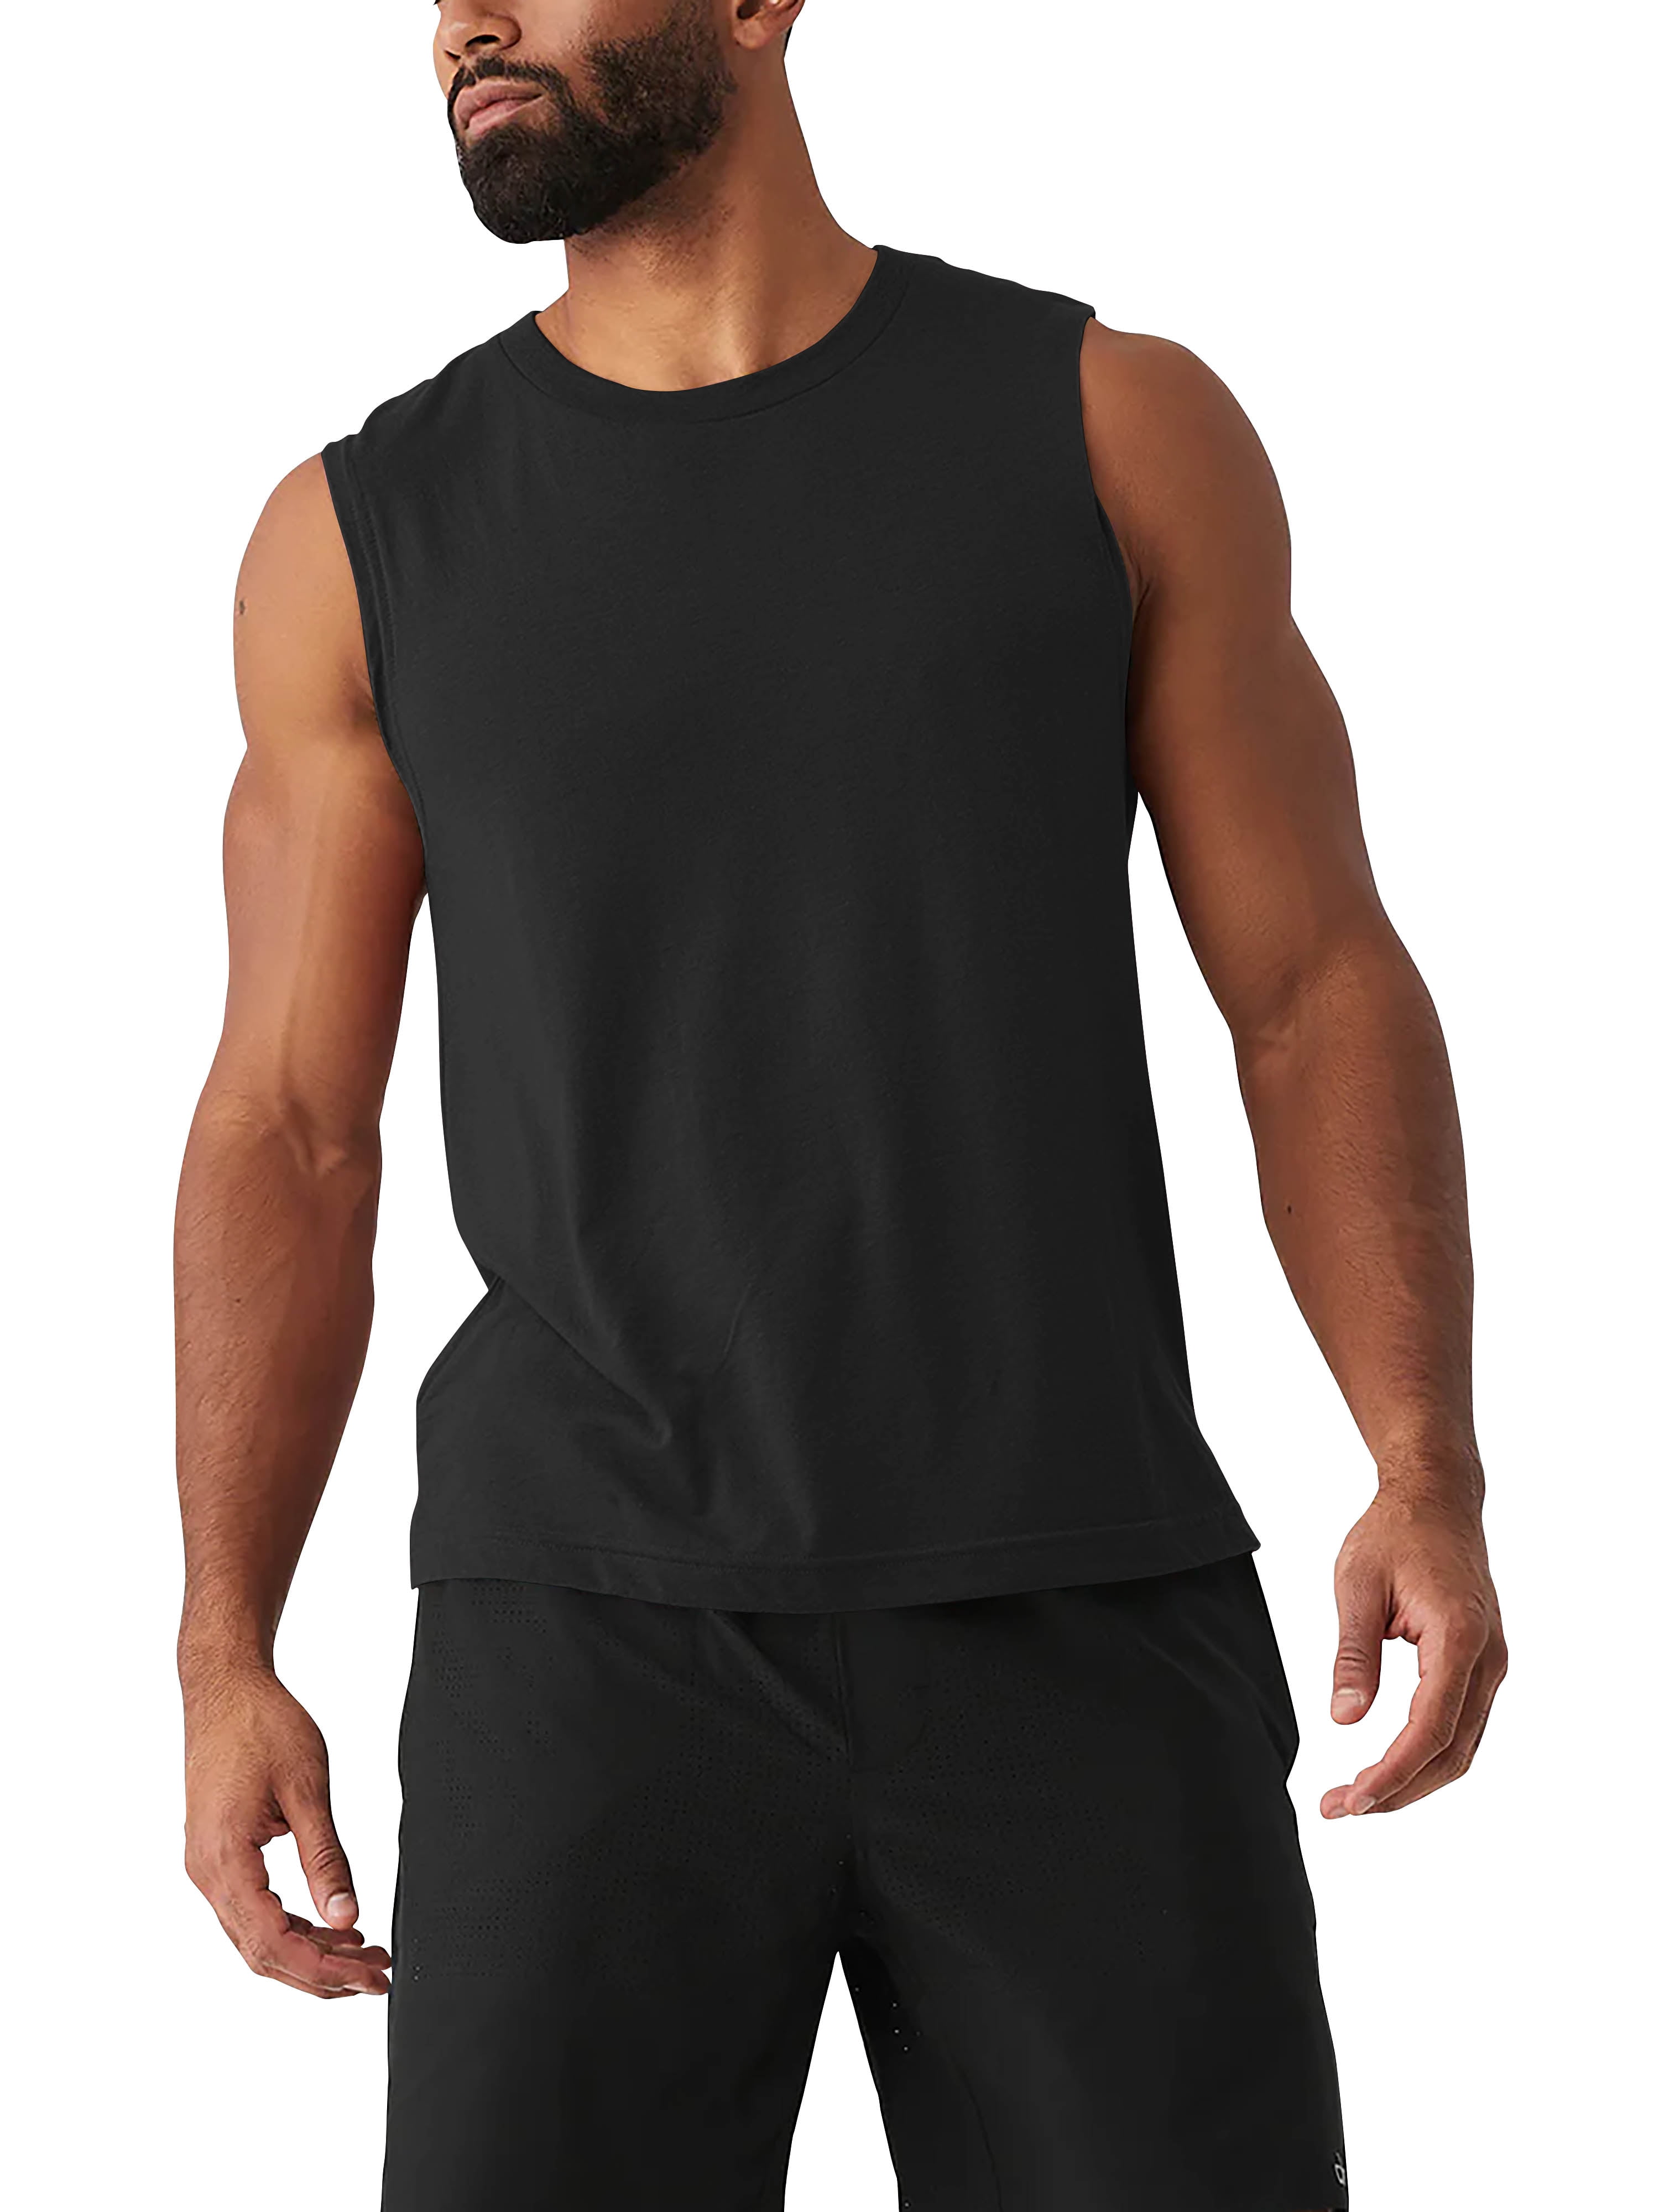 Ma Croix Men's Sleeveless Tee Shirts Muscle Gym Tank Top Work Out ...